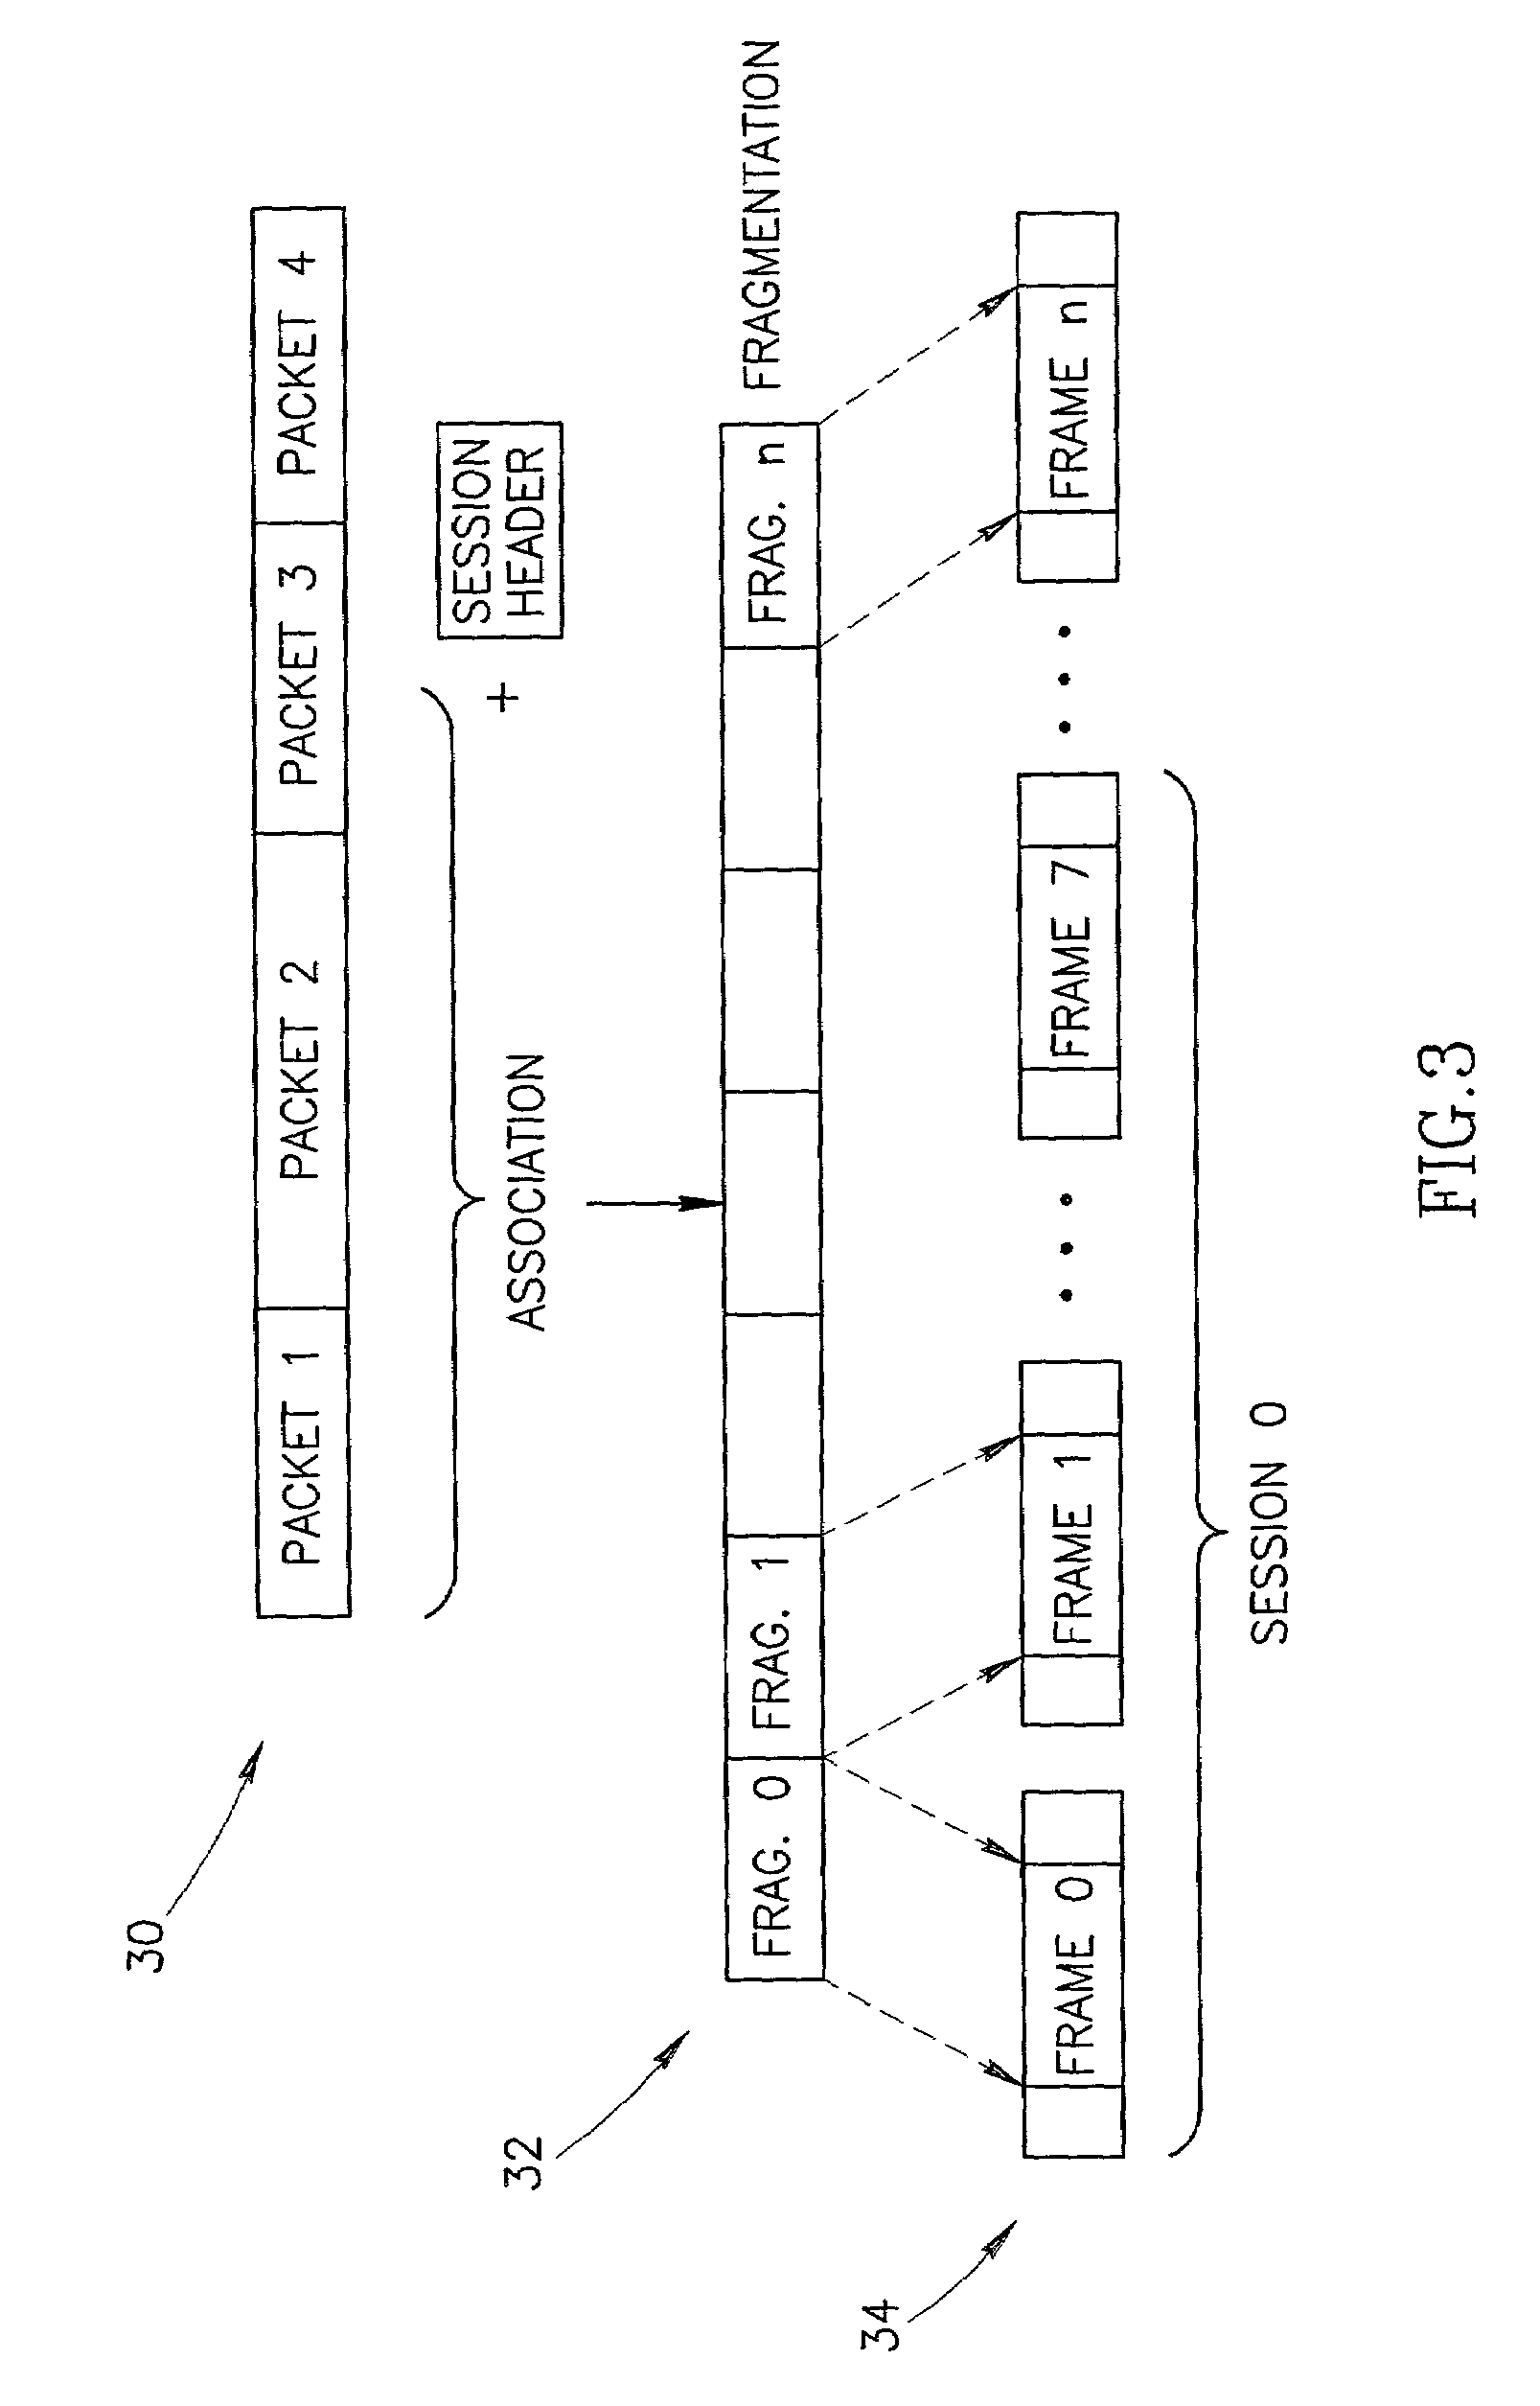 Channel access method for powerline carrier based media access control protocol